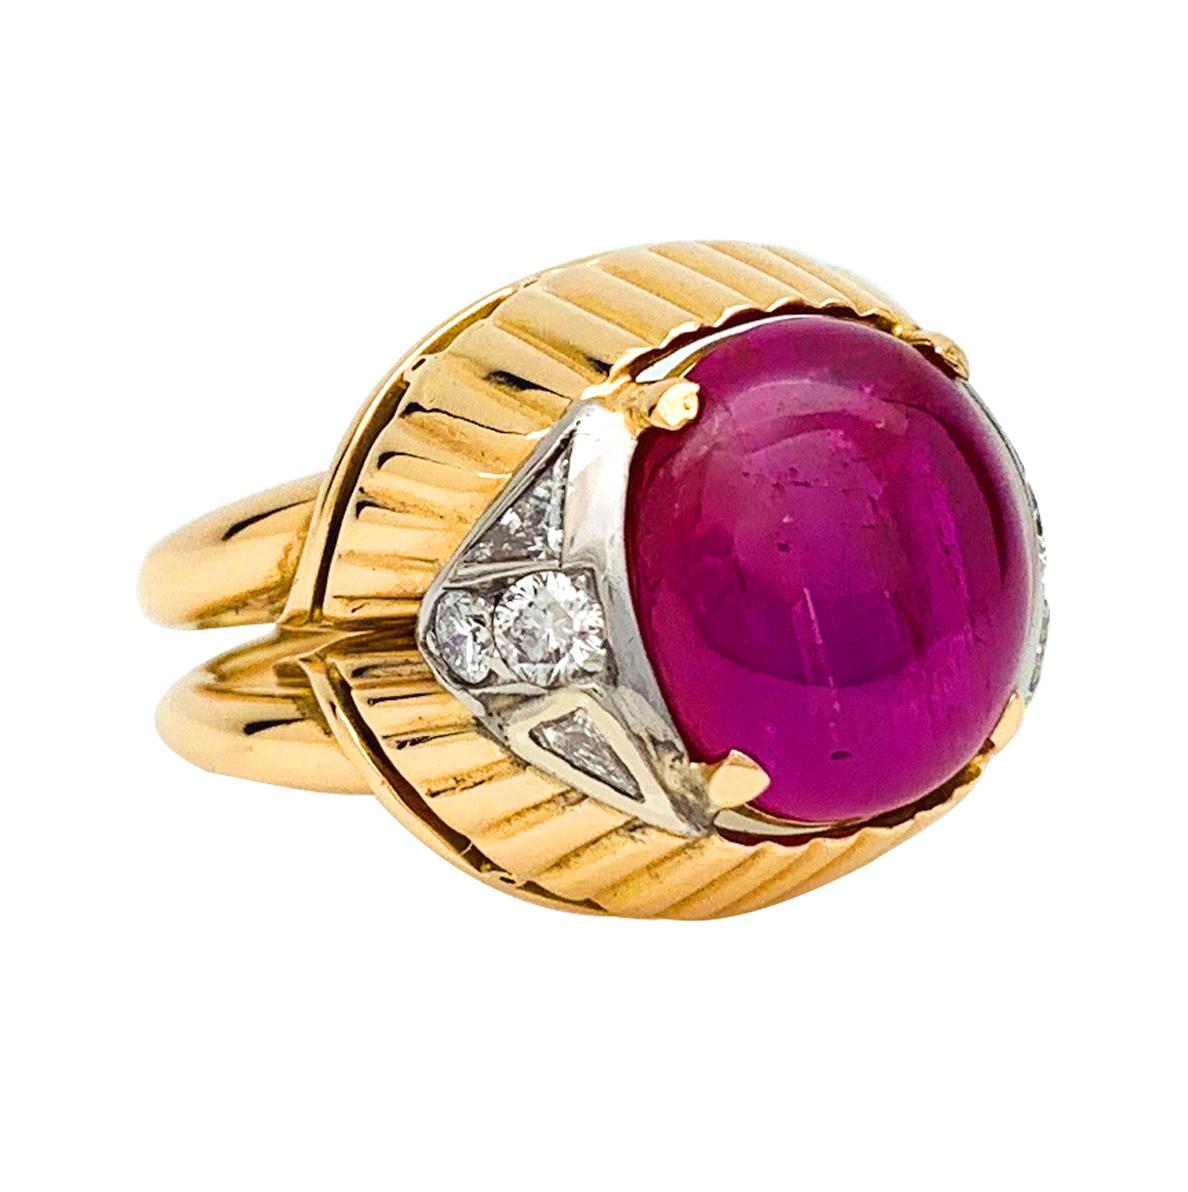 Women's or Men's Burmese Ruby Cabochon on a 1950s Cocktail Ring